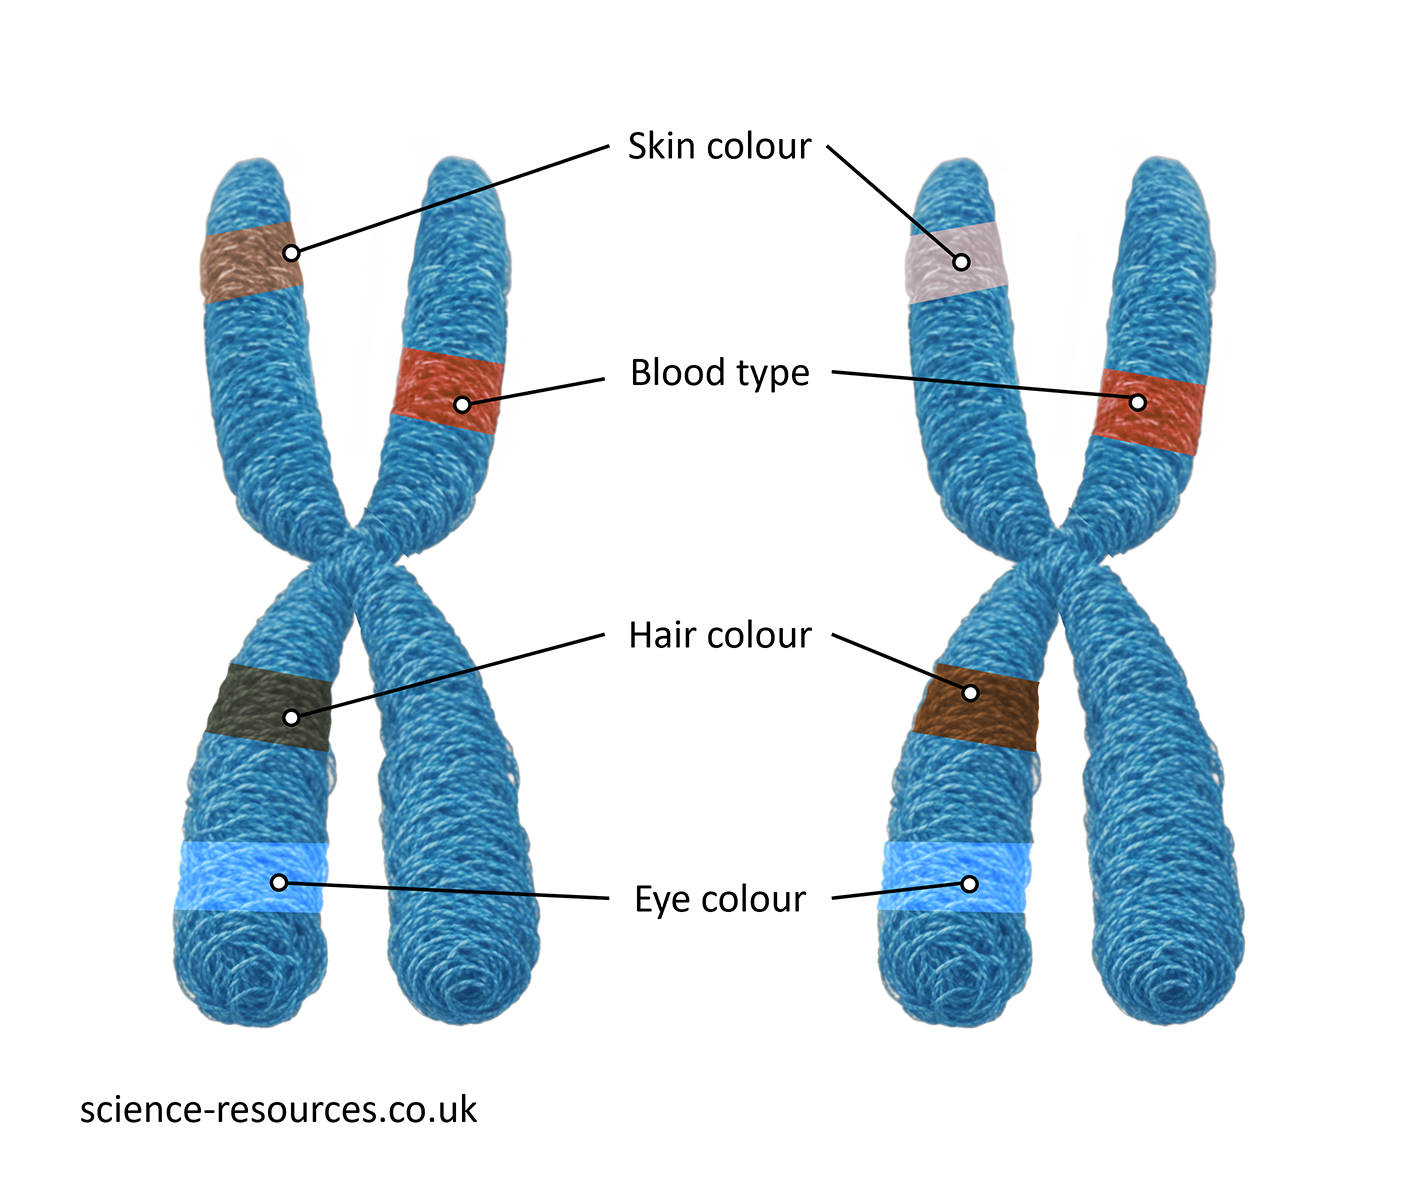 This image depicts two blue chromosome-like structures, each labeled with different traits: skin color, blood type, hair color, and eye color. It’s a simplified representation used for educational purposes to explain how certain traits are inherited. 